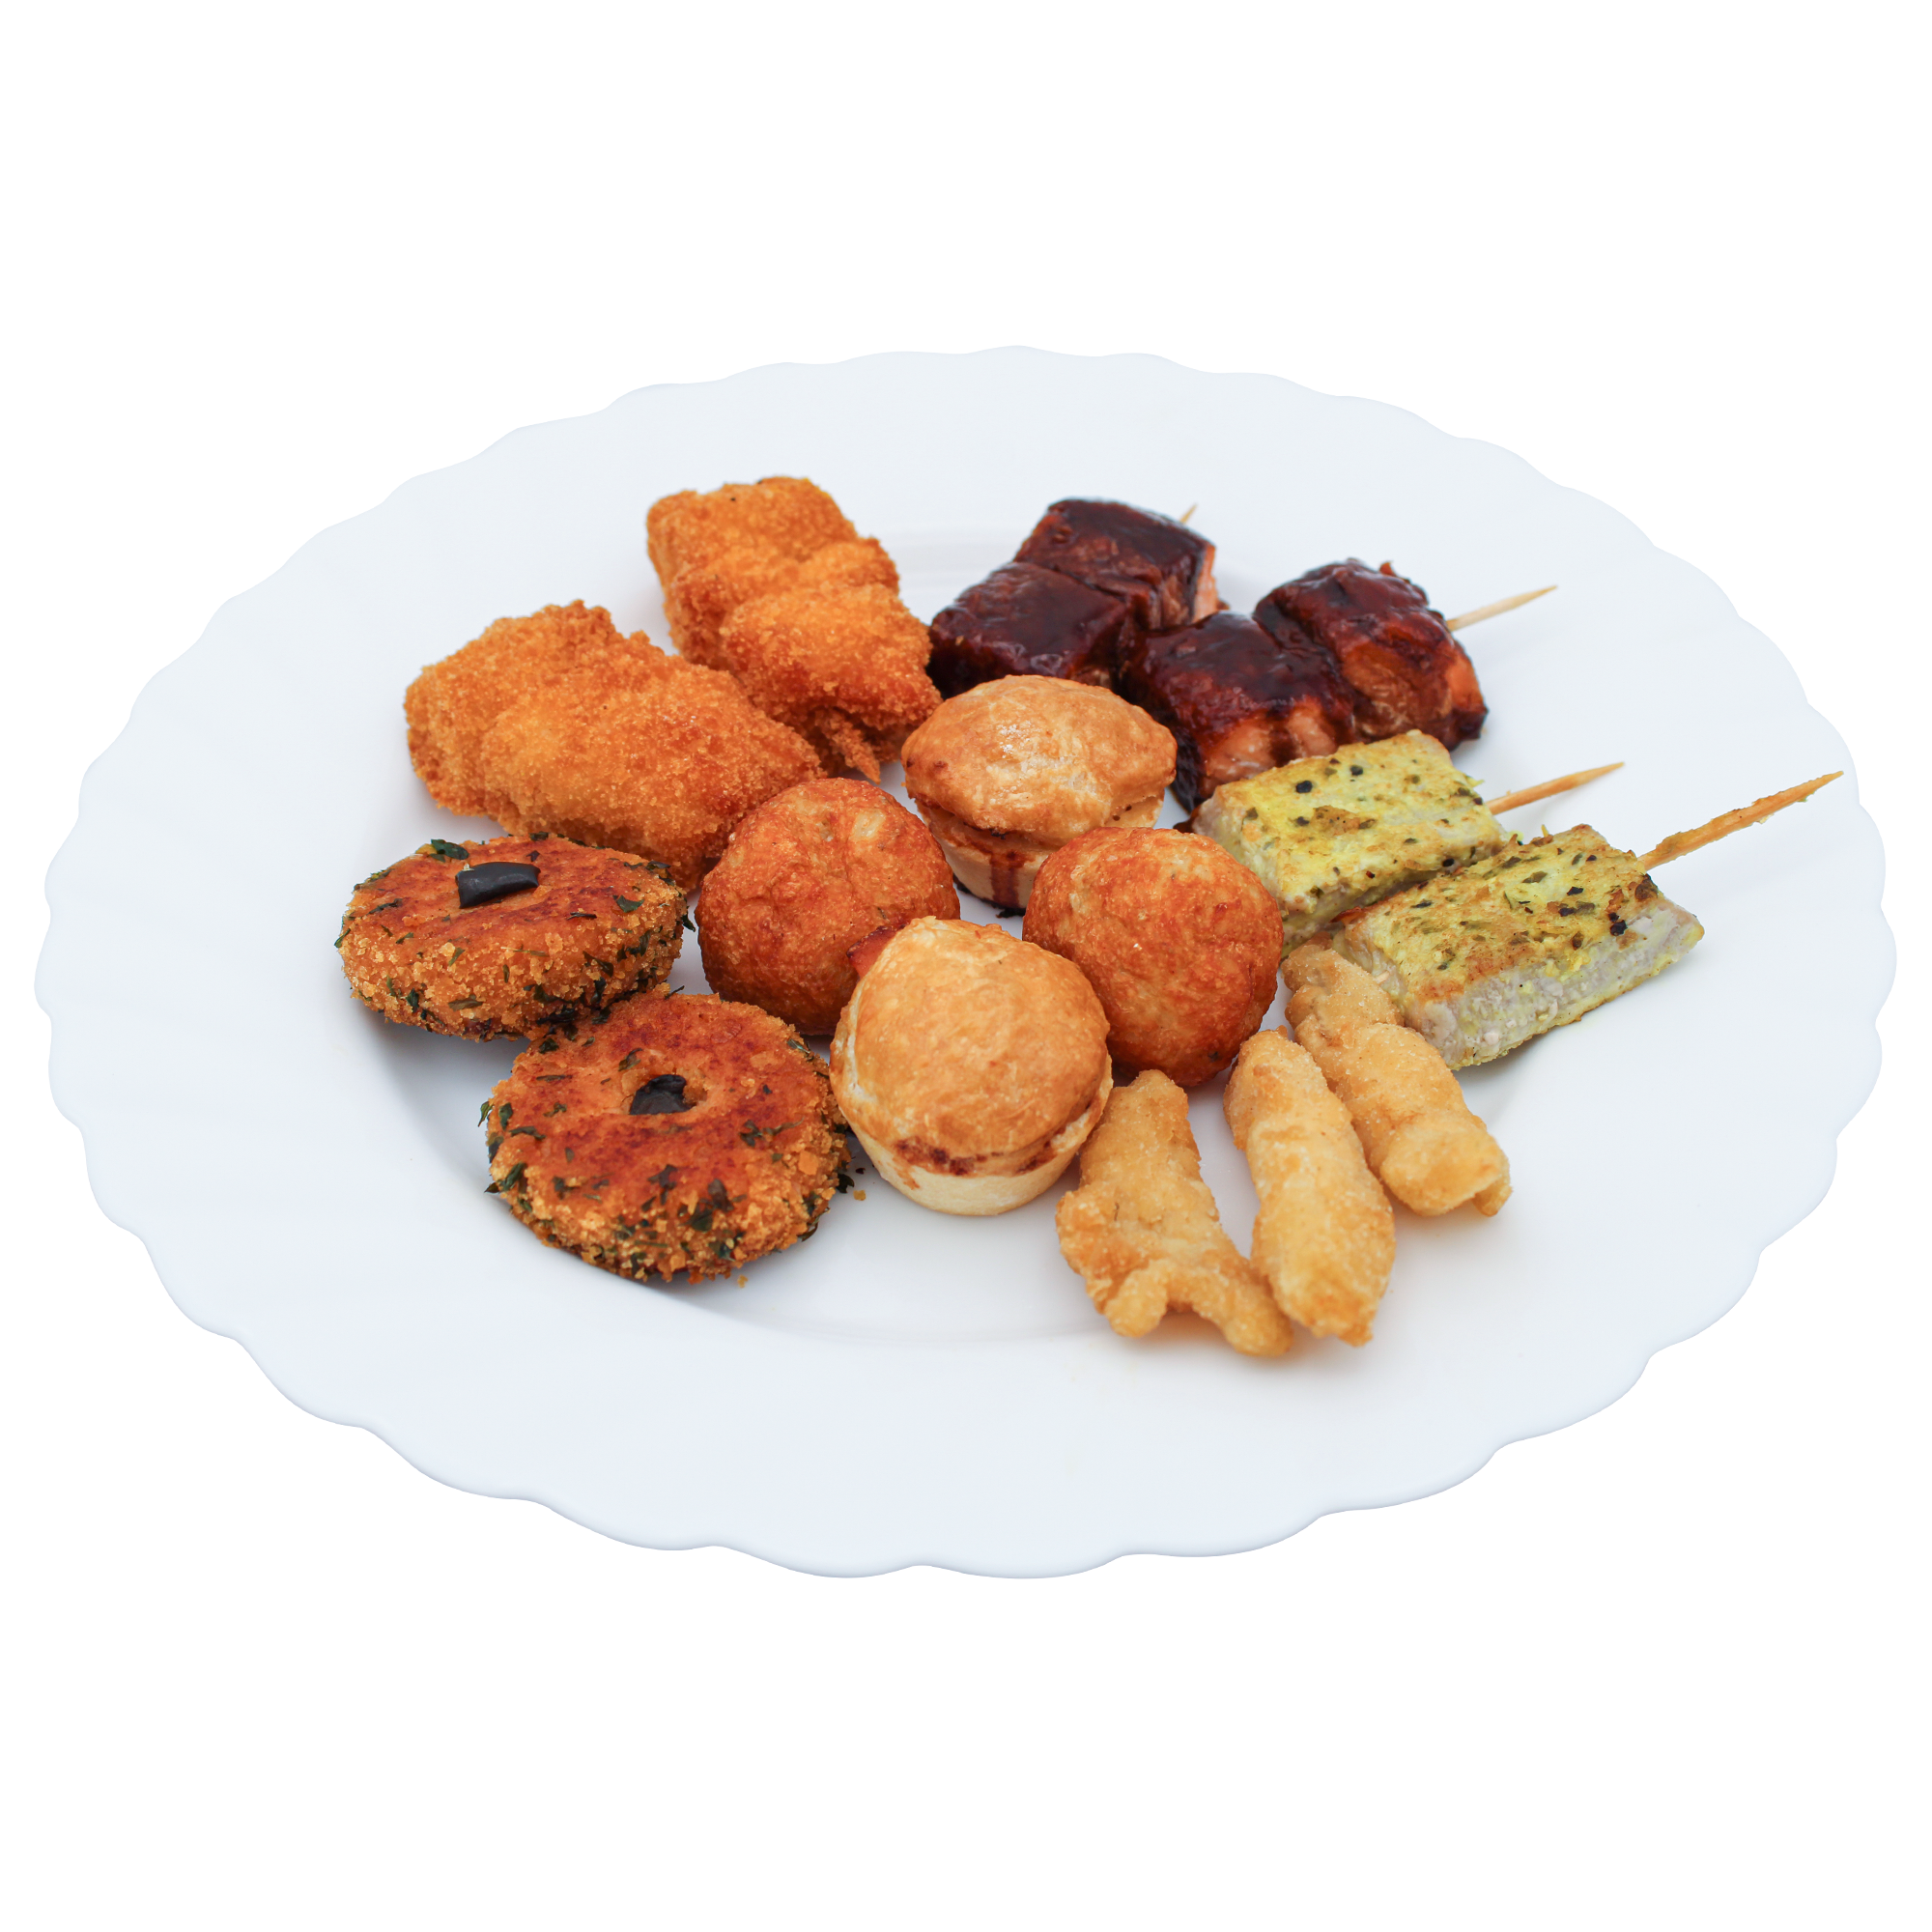 Hot Canapés to include chef's choice of Assorted Vegetarian options - 8 pcs (China)